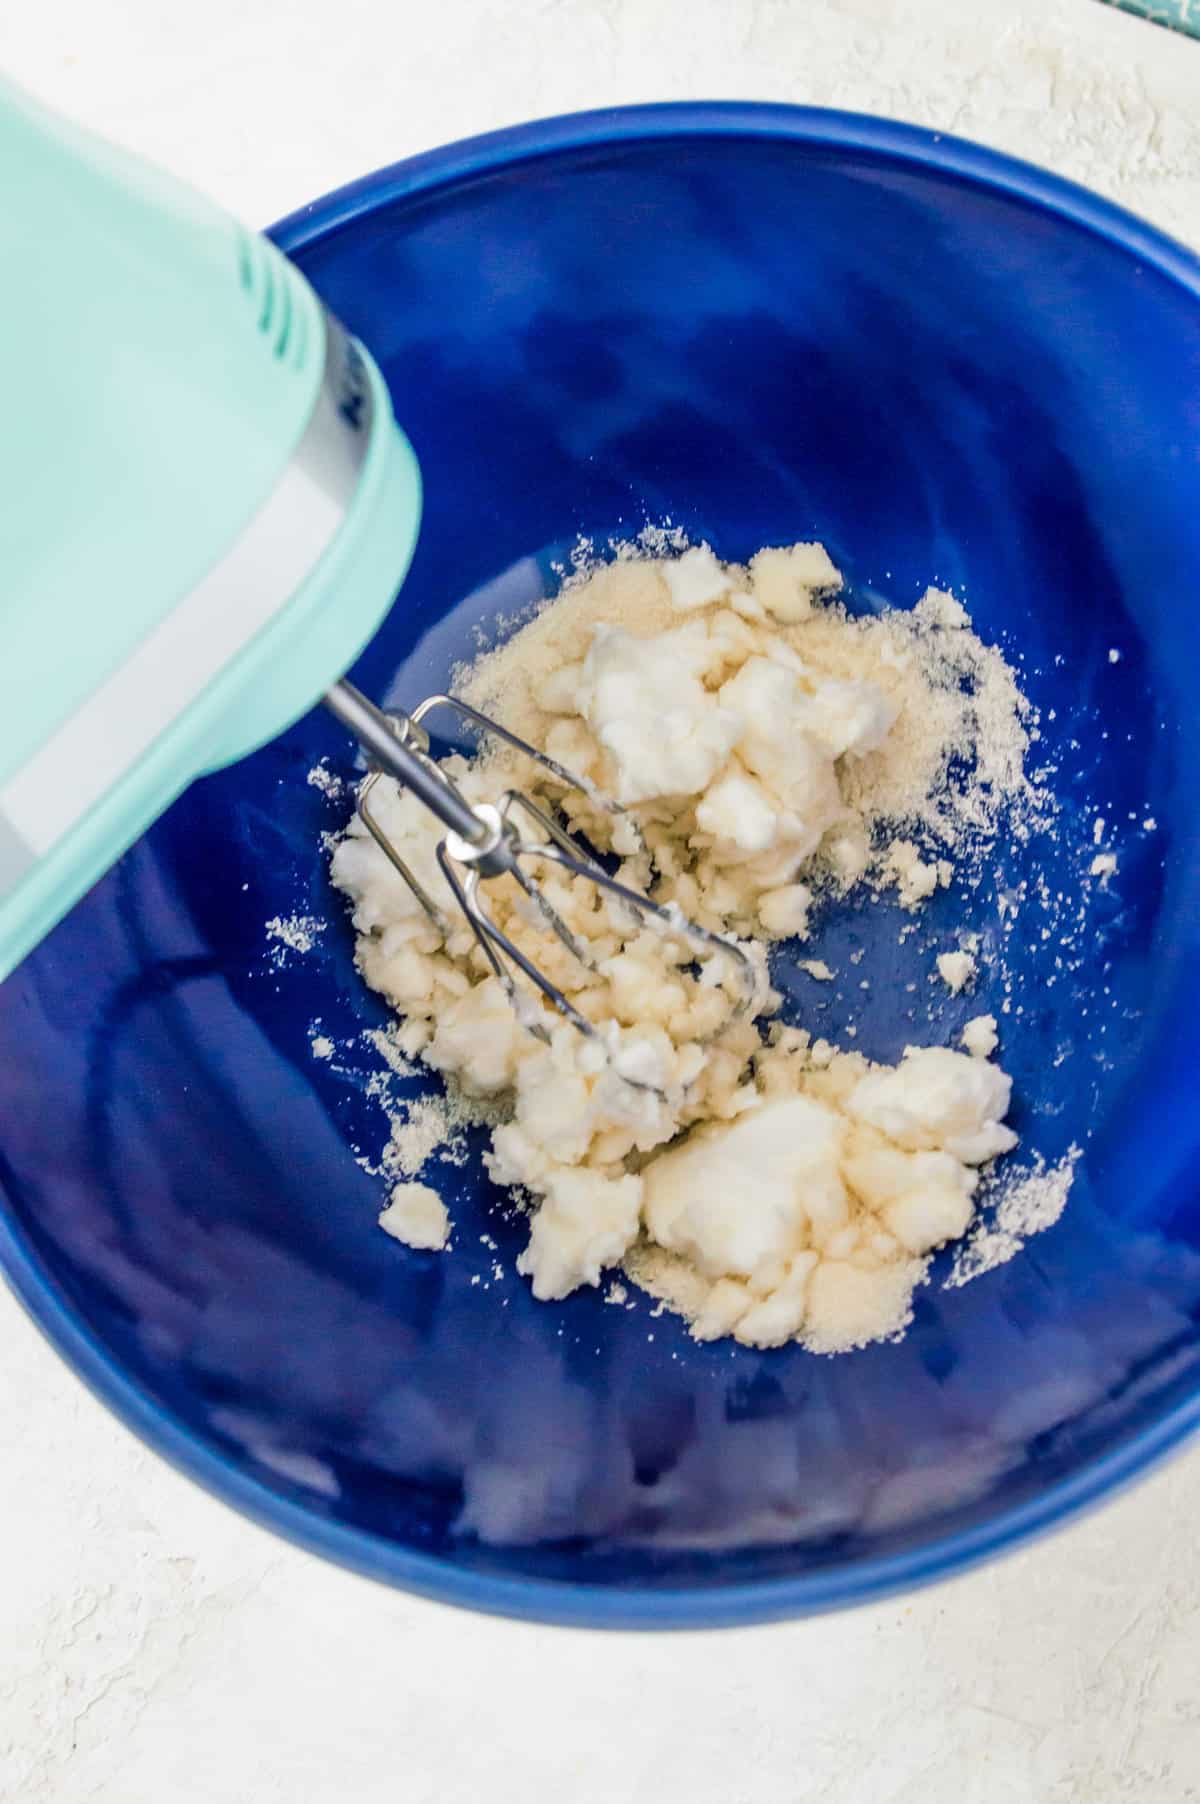 Cream cheese and cane sugar in a large blue bowl being blended with a hand mixer.